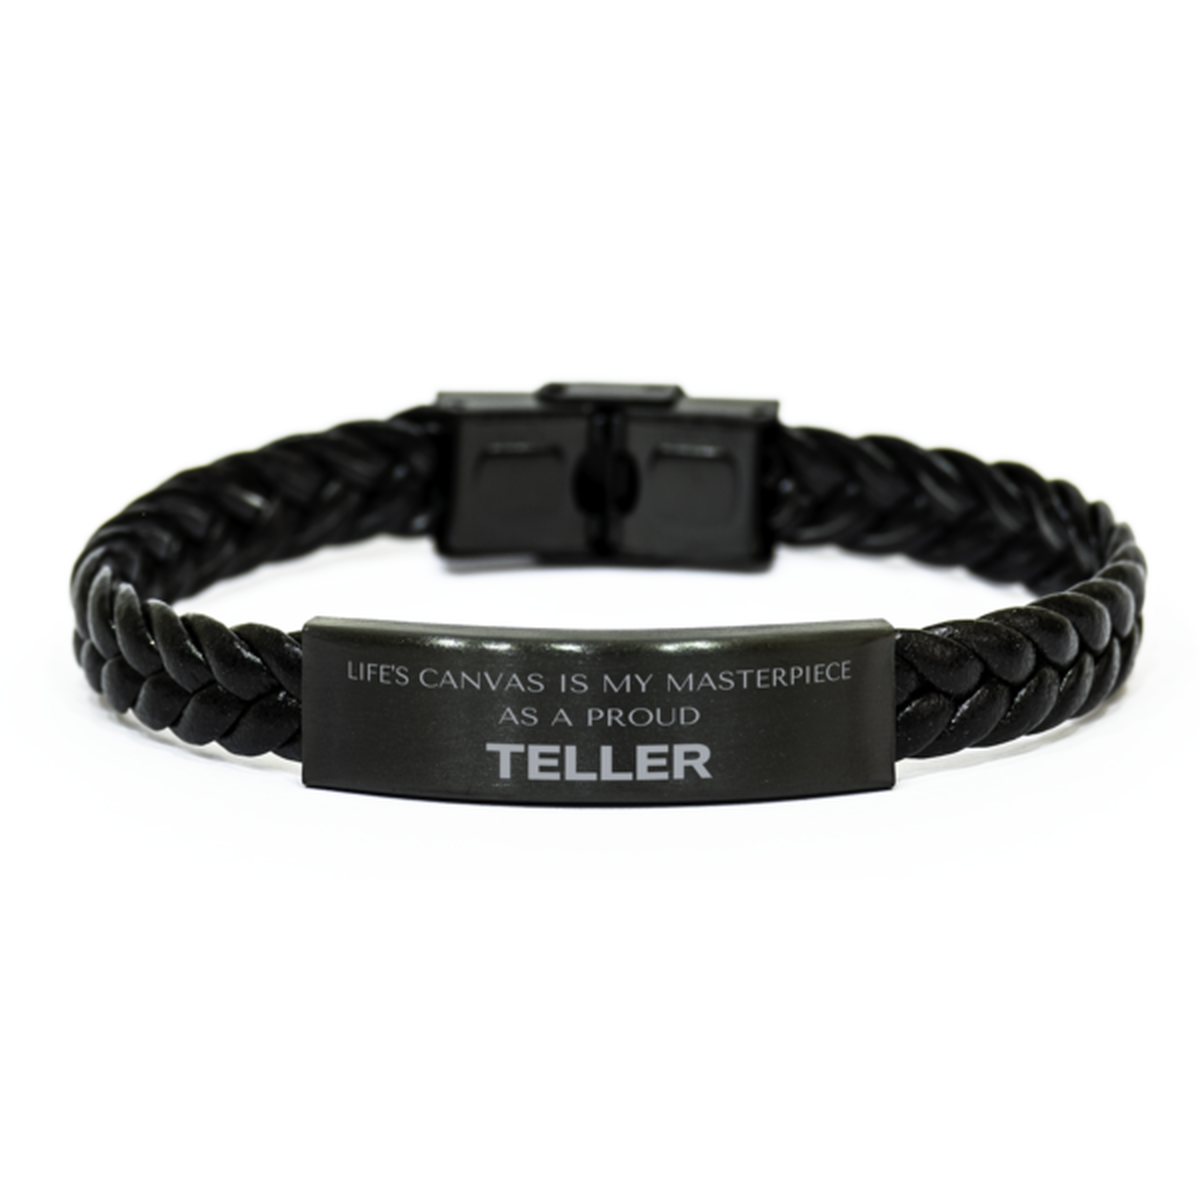 Proud Teller Gifts, Life's canvas is my masterpiece, Epic Birthday Christmas Unique Braided Leather Bracelet For Teller, Coworkers, Men, Women, Friends